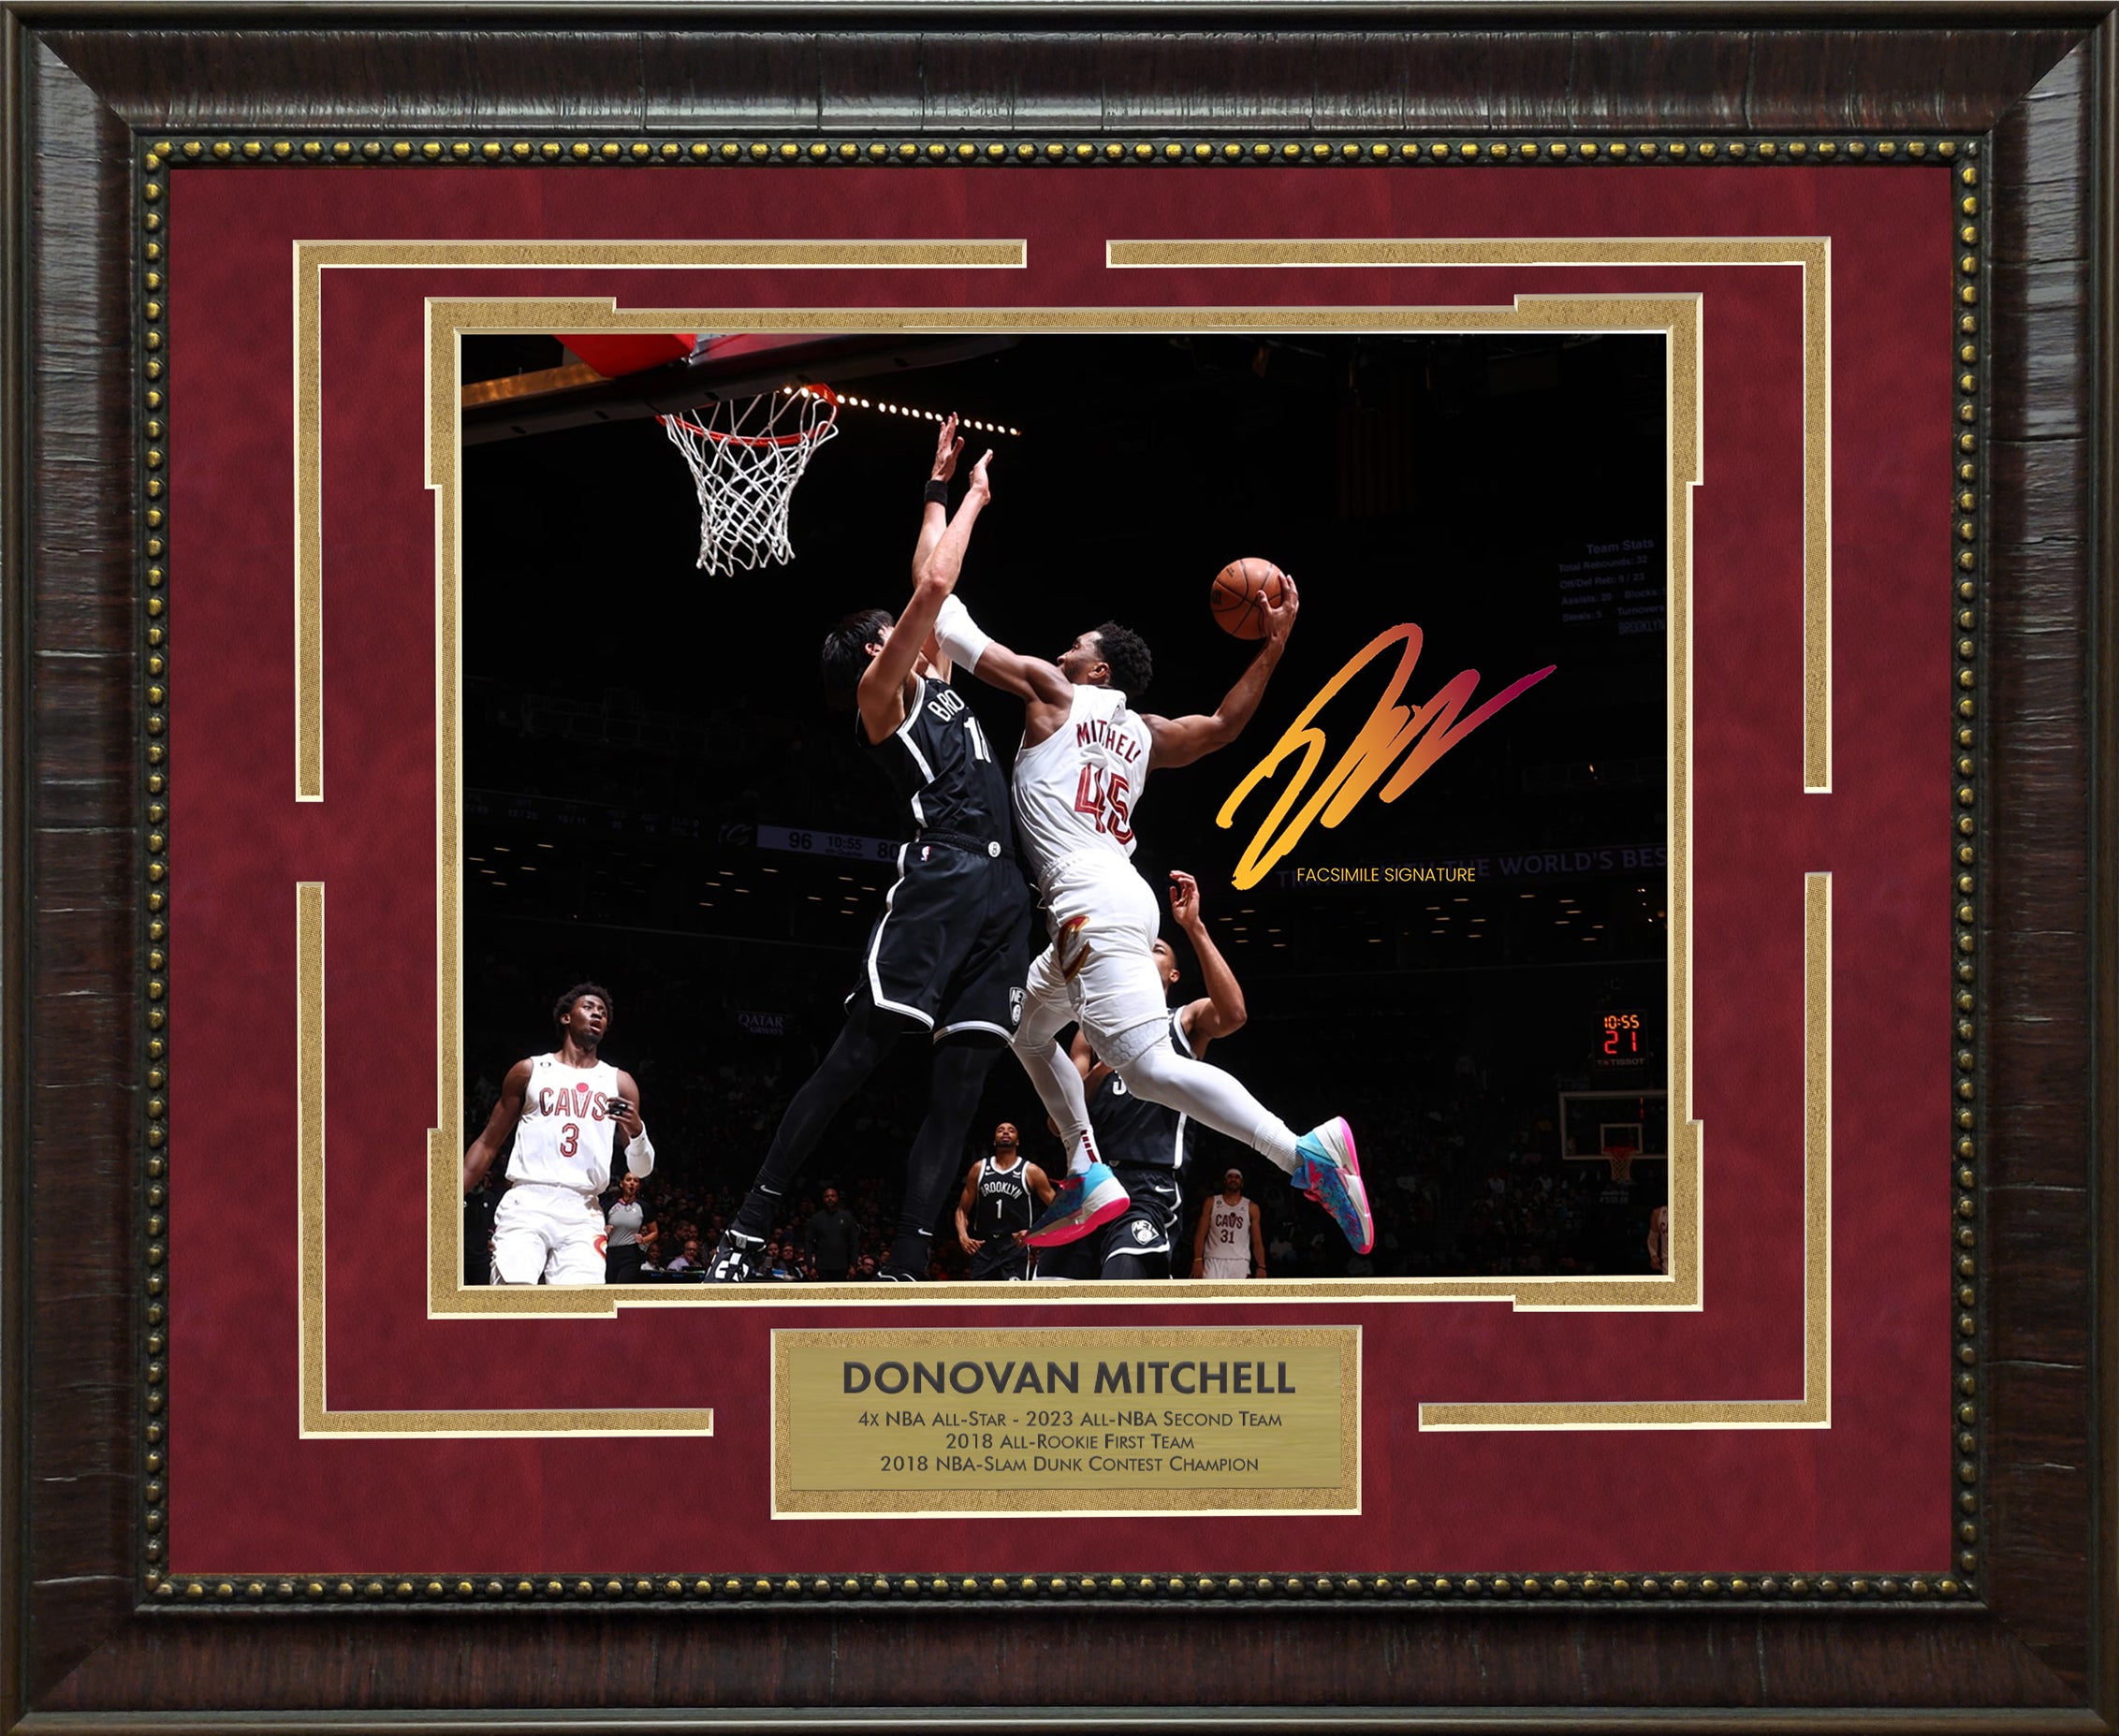 Donovan Mitchell - Cleveland Cavaliers Spotlight with Facsimile Signature